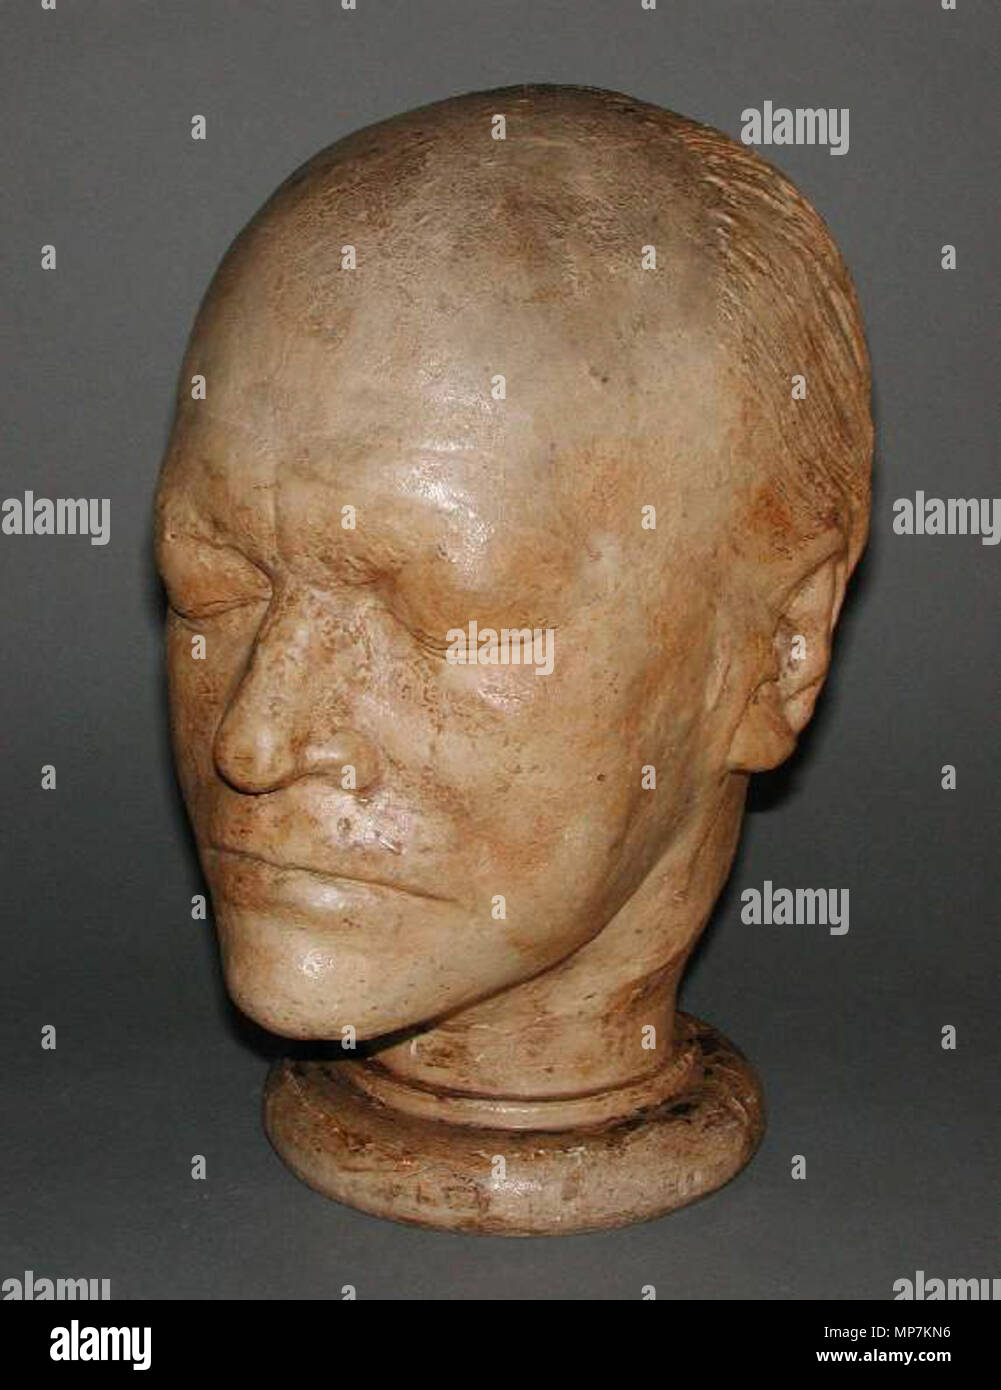 . English: James S De Ville 1776-1846 Head of William Blake - Plaster cast - Sept 1823 Fitzwilliam Museum Title: Head of William Blake (1757-1827) Maker(s) & Production: De Ville, James S., maker, 1776-1846, plaster cast maker, England, London Category: sculpture Name: life mask Date: 1823 The life mask was taken on September 1823 Period(s): early 19th Century; George IV Description: Plaster cast, with shellac? coating. The neck rises from a circular base. In black tin trunk (A) with key (B) not accessioned Technique: casting (process); whole Material(s): plaster; whole shellac; surface; proba Stock Photo